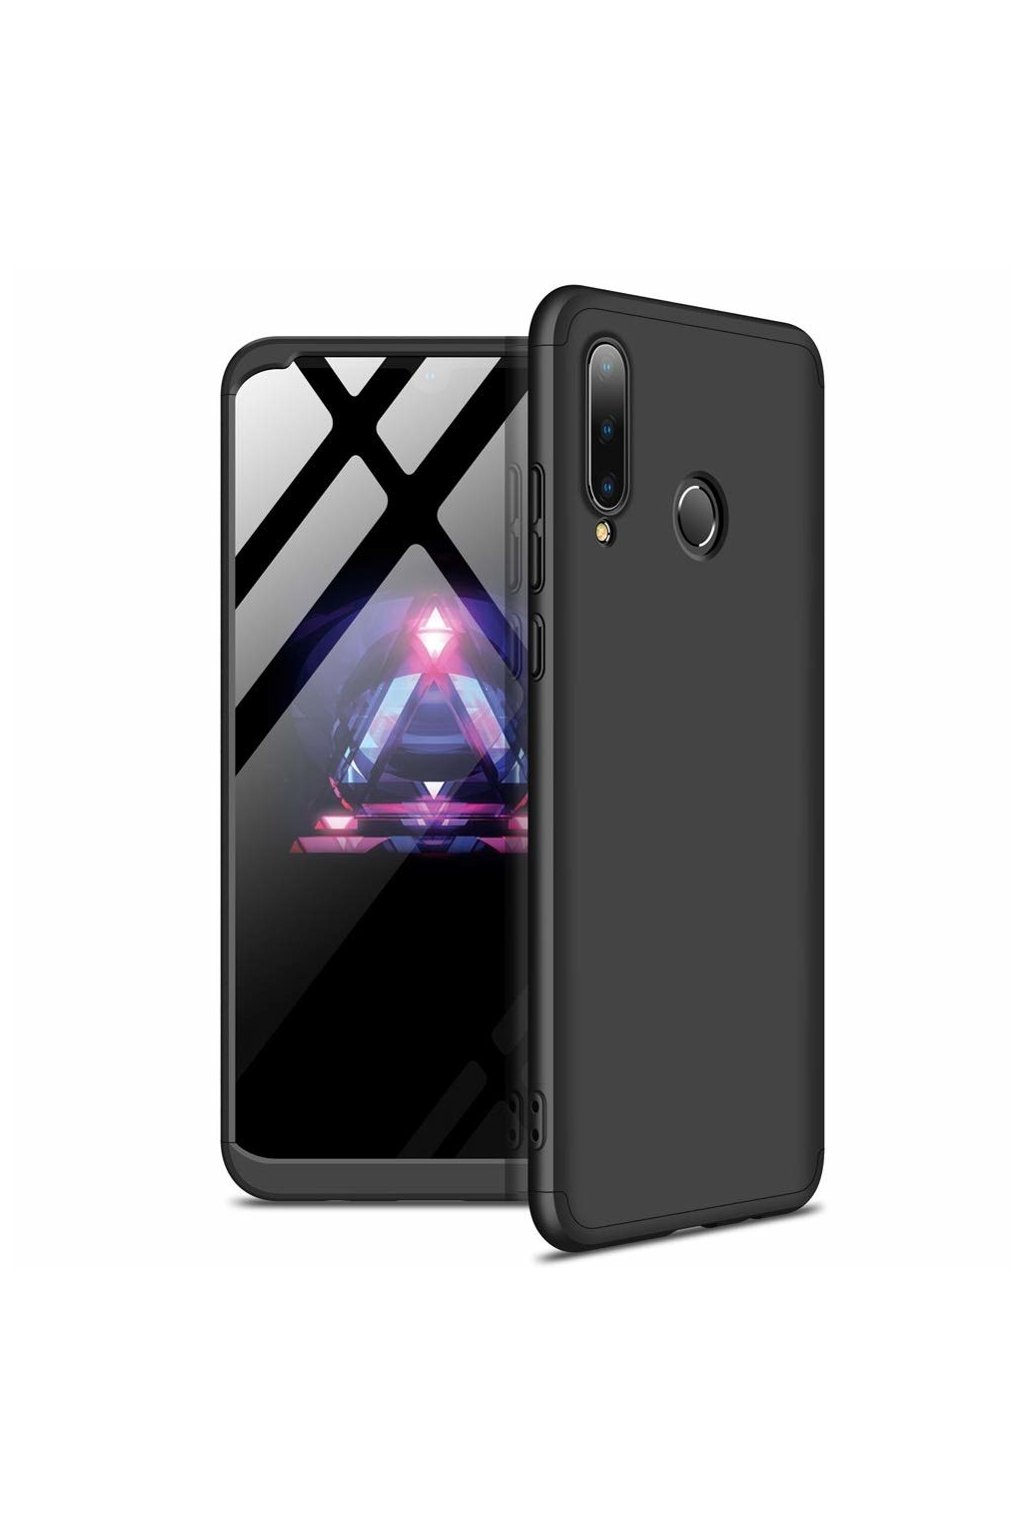 eng pl GKK 360 Protection Case Front and Back Case Full Body Cover Huawei P30 Lite black 49659 1